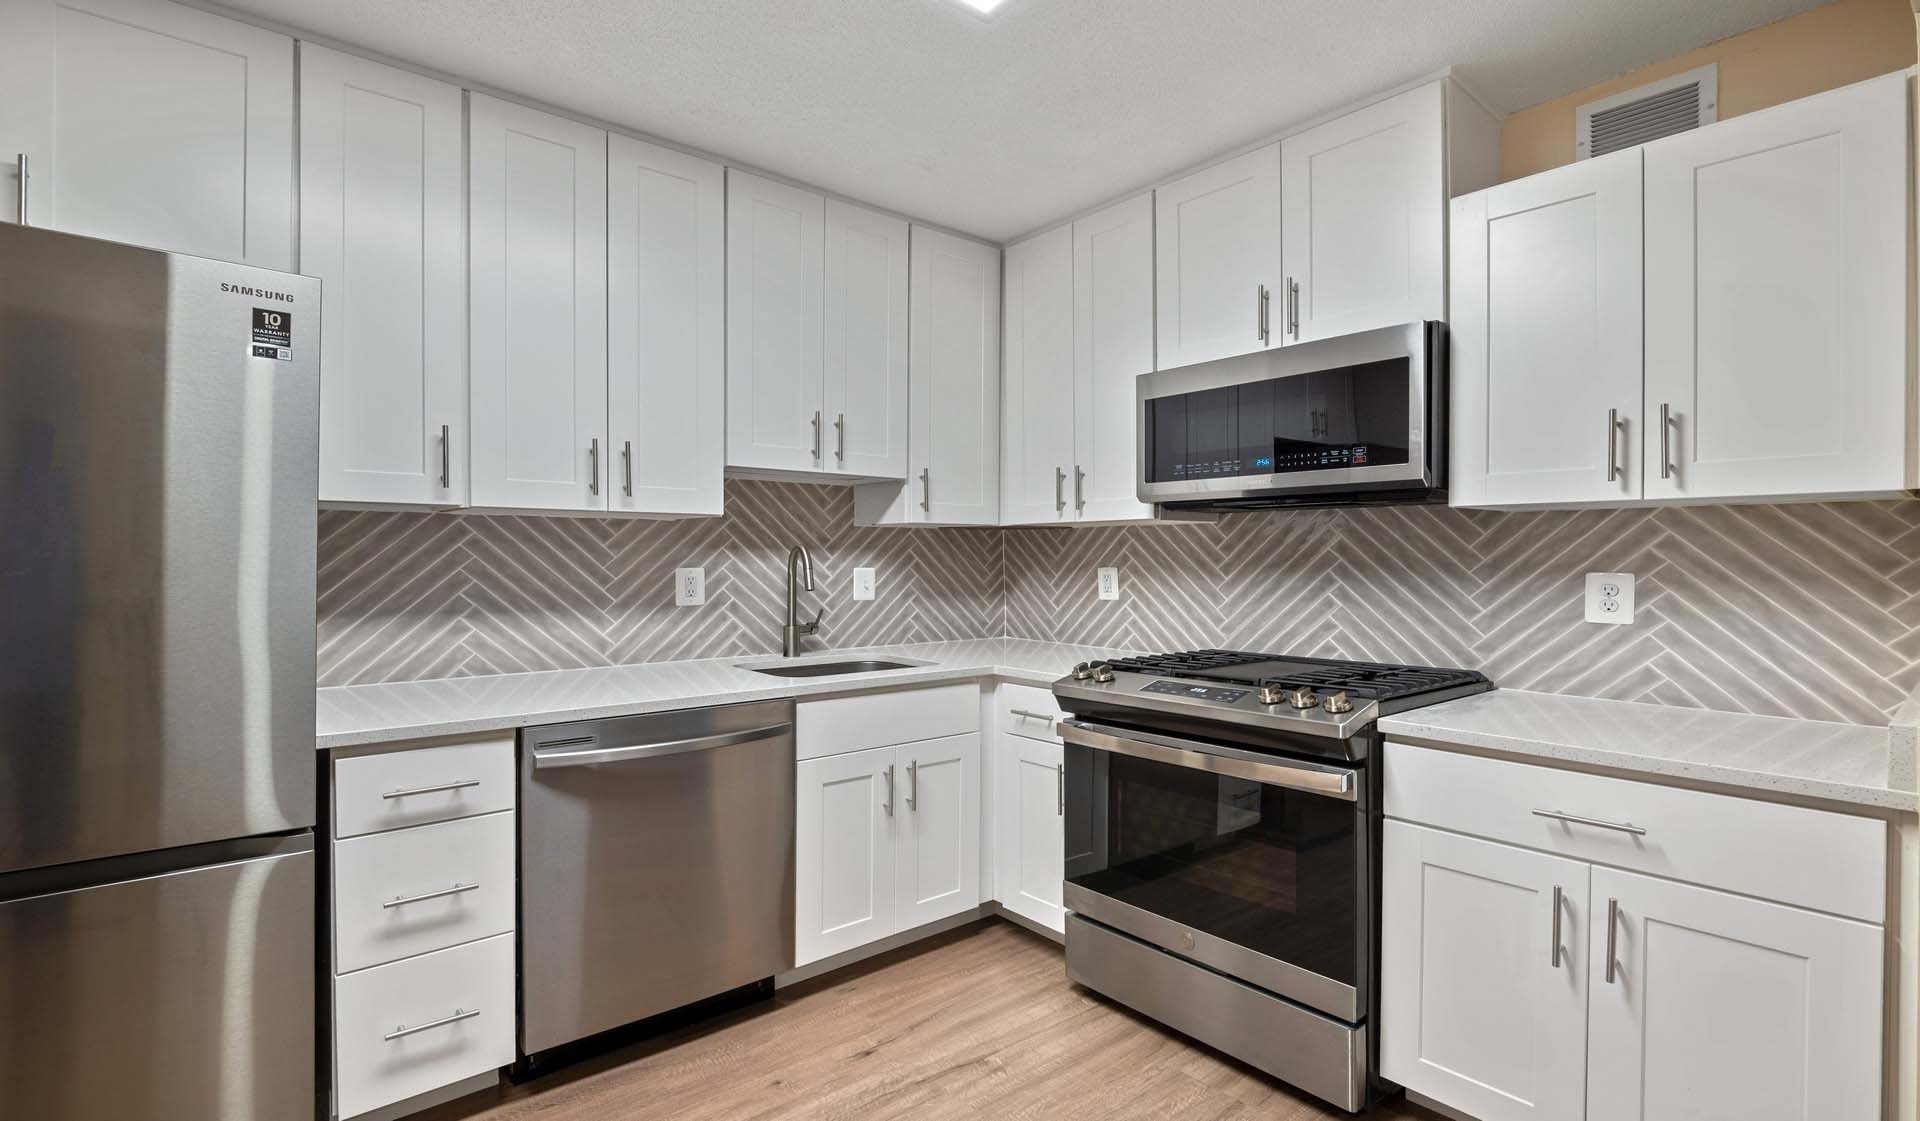 North Park Apartments - Chevy Chase, MD - Interior Kitchen